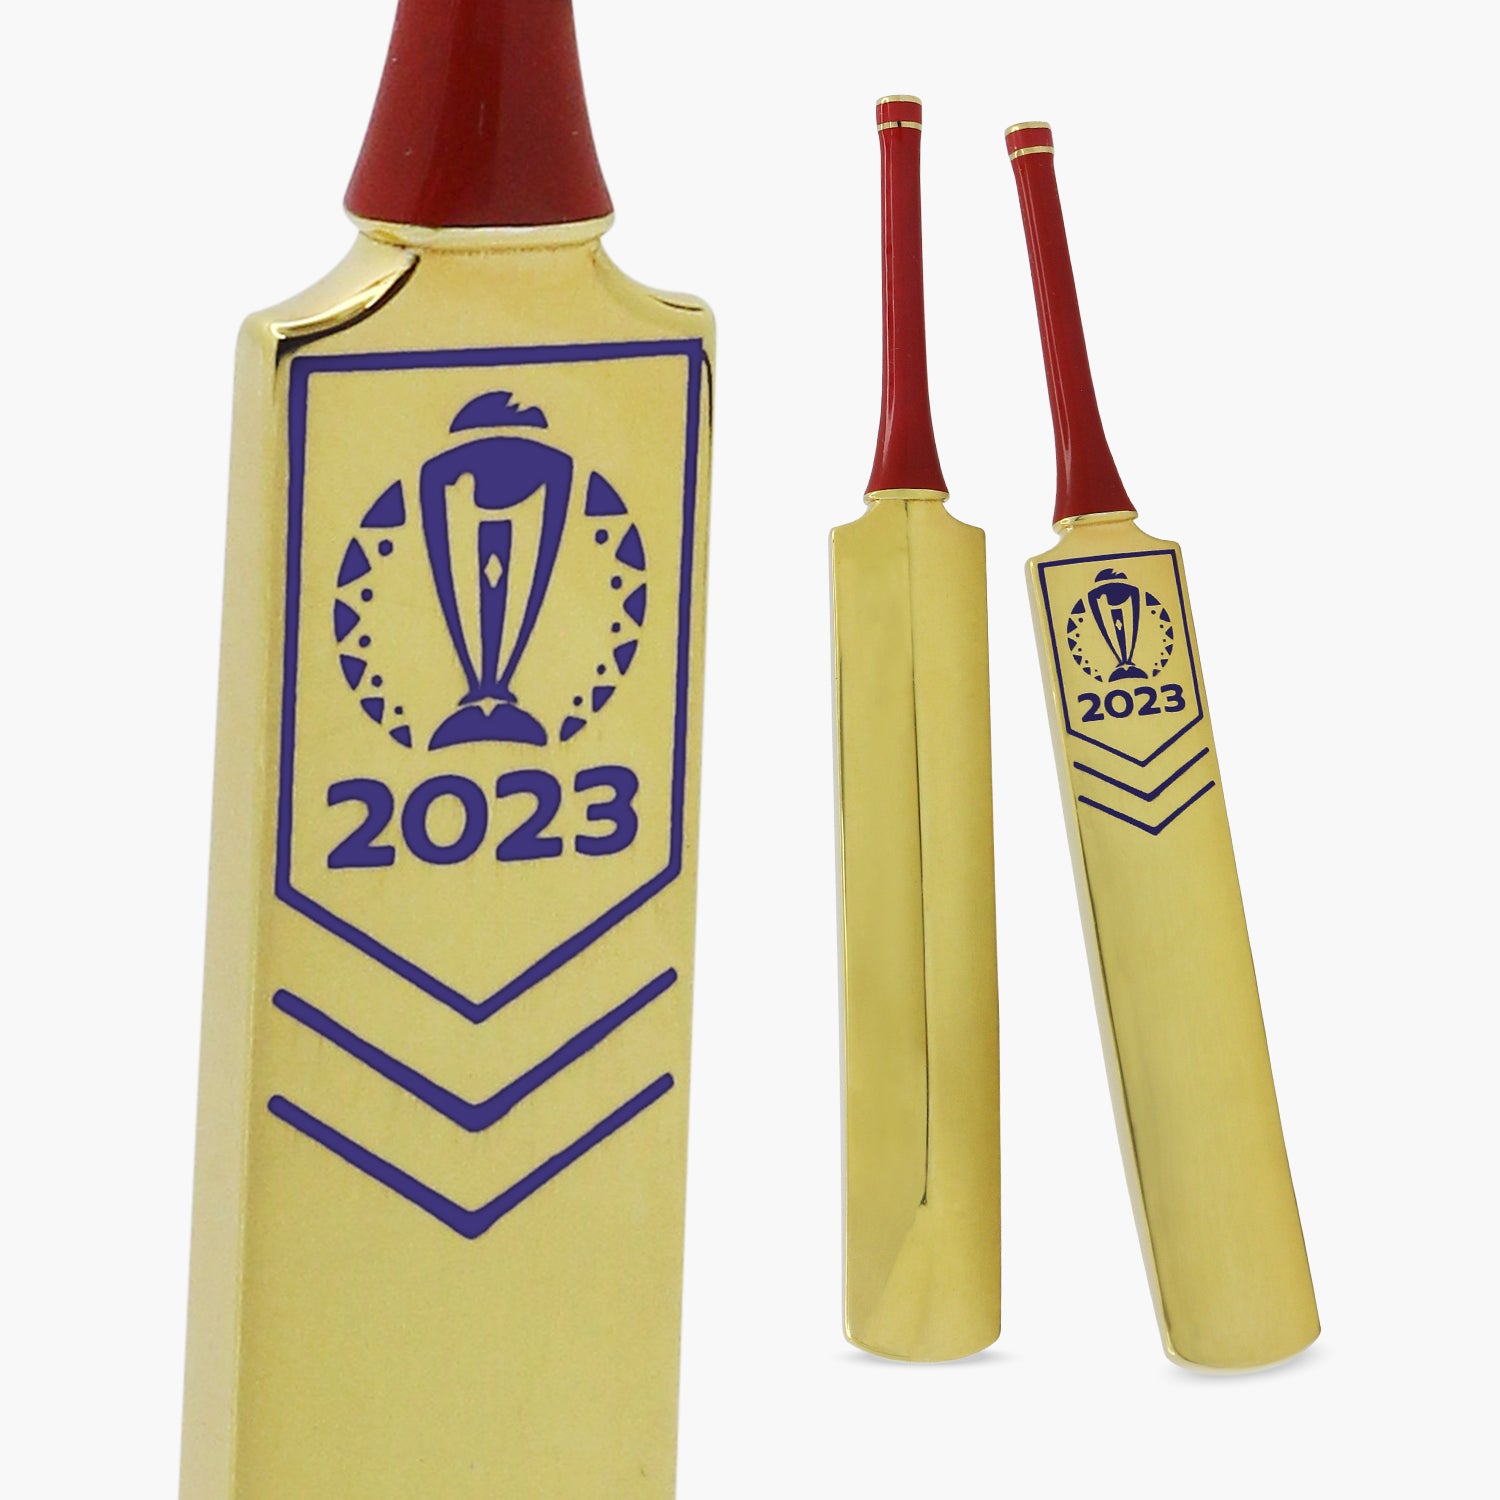 Official ICC Cricket World Cup 2023 Solid Silver Cricket Bat